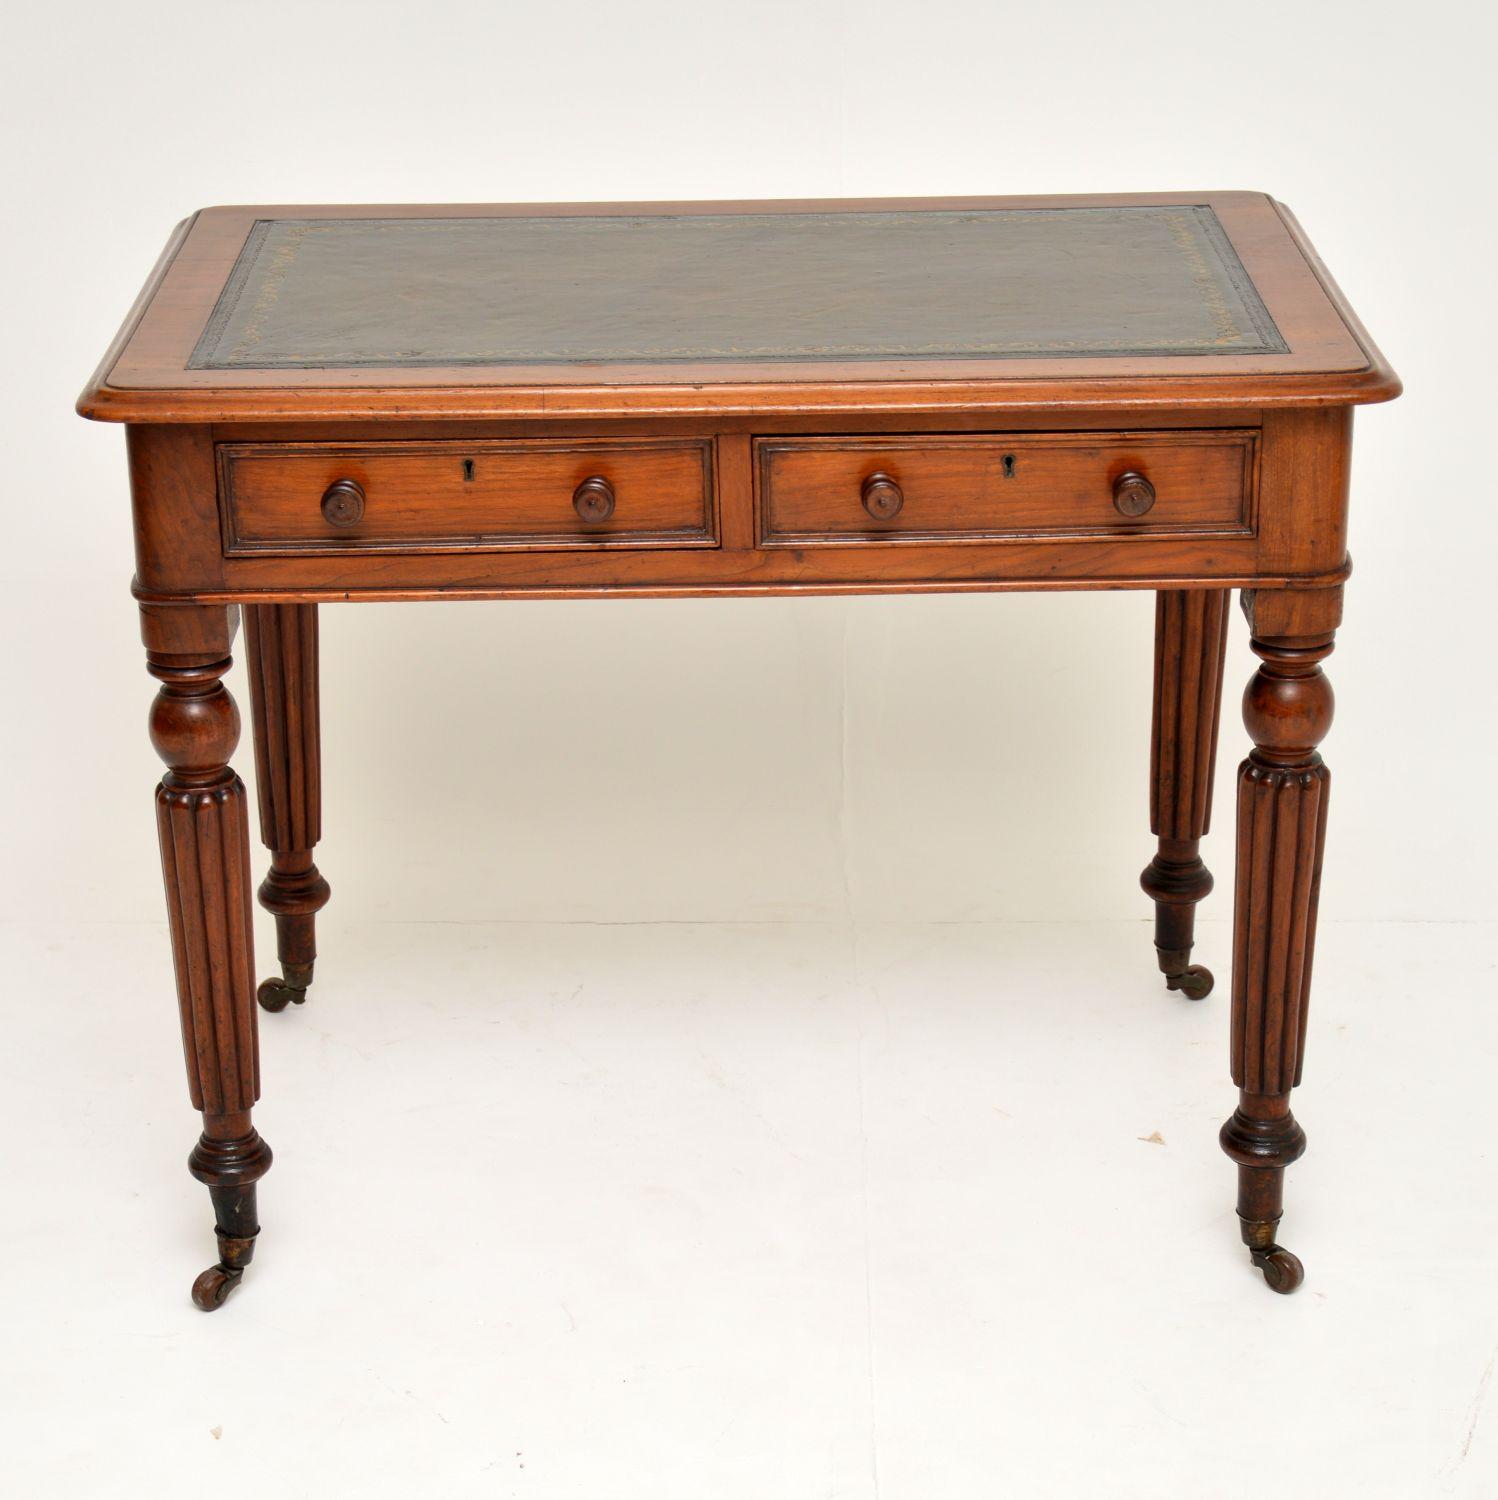 This antique early Victorian writing table is of high quality and is in very good original condition. It has a tooled leather writing surface and a good depth for the size. The drawers have fine dovetails, with original locks and turned handles.